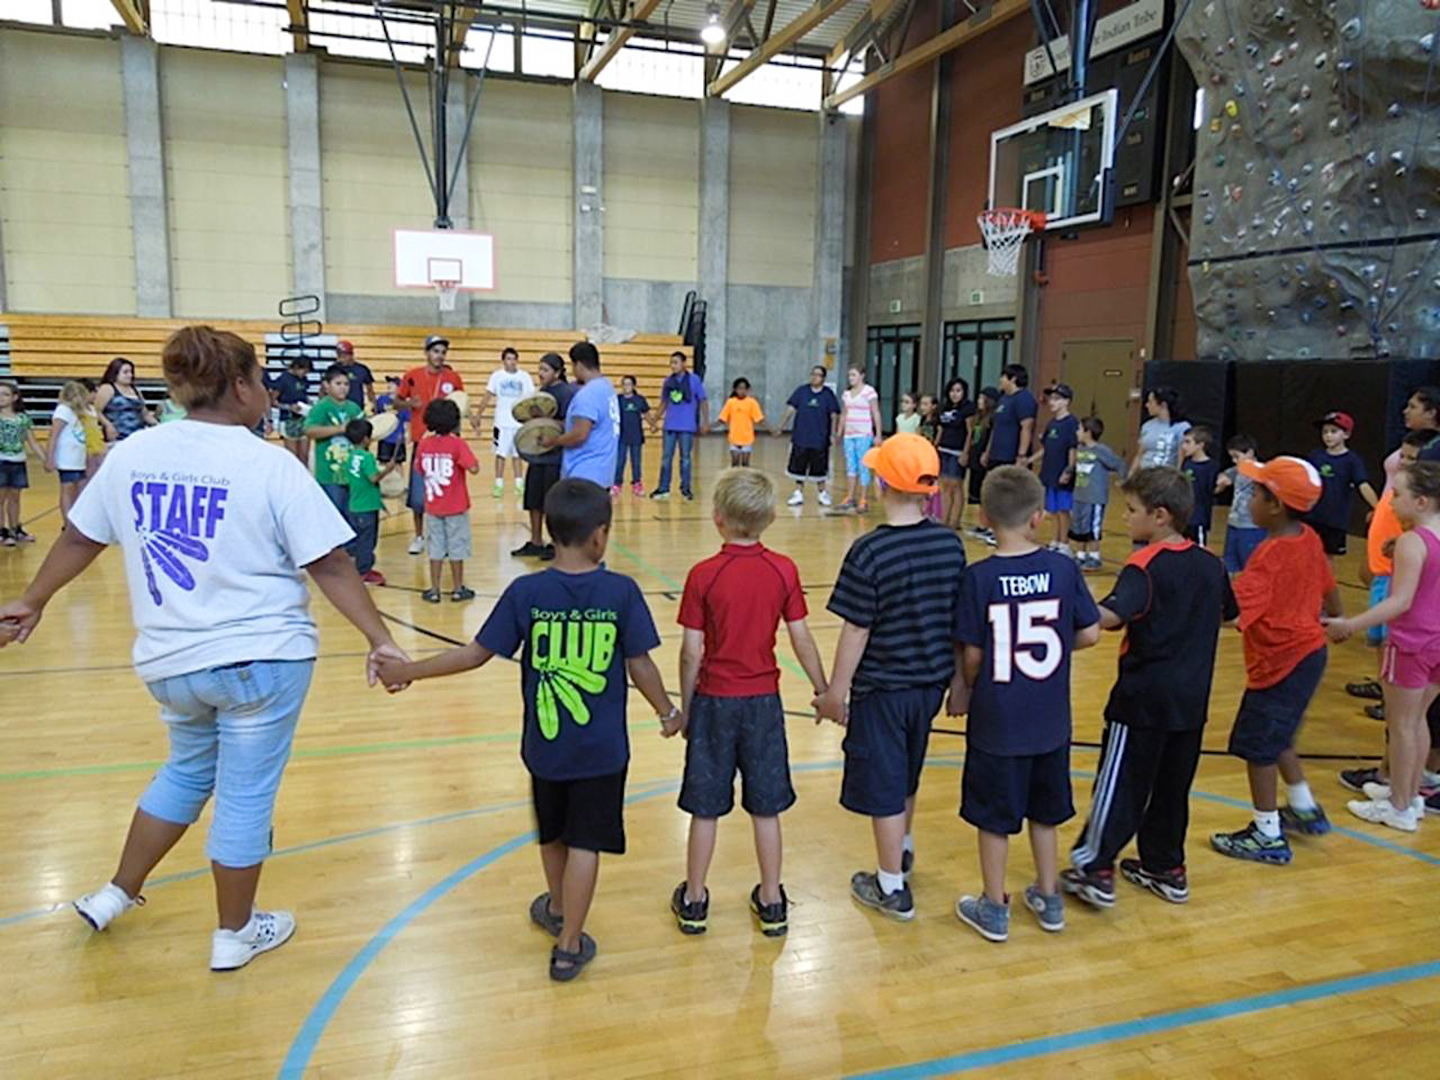 The Boys & Girls Club of the Southern Ute Tribe participated in a round dance as part of the Around the World Theme for Summer Club 2013. Each week, the club highlights a different country or region and focuses on an indigenous culture. Since the Sun Dance is taking place this weekend, the theme is Southern Ute Culture.